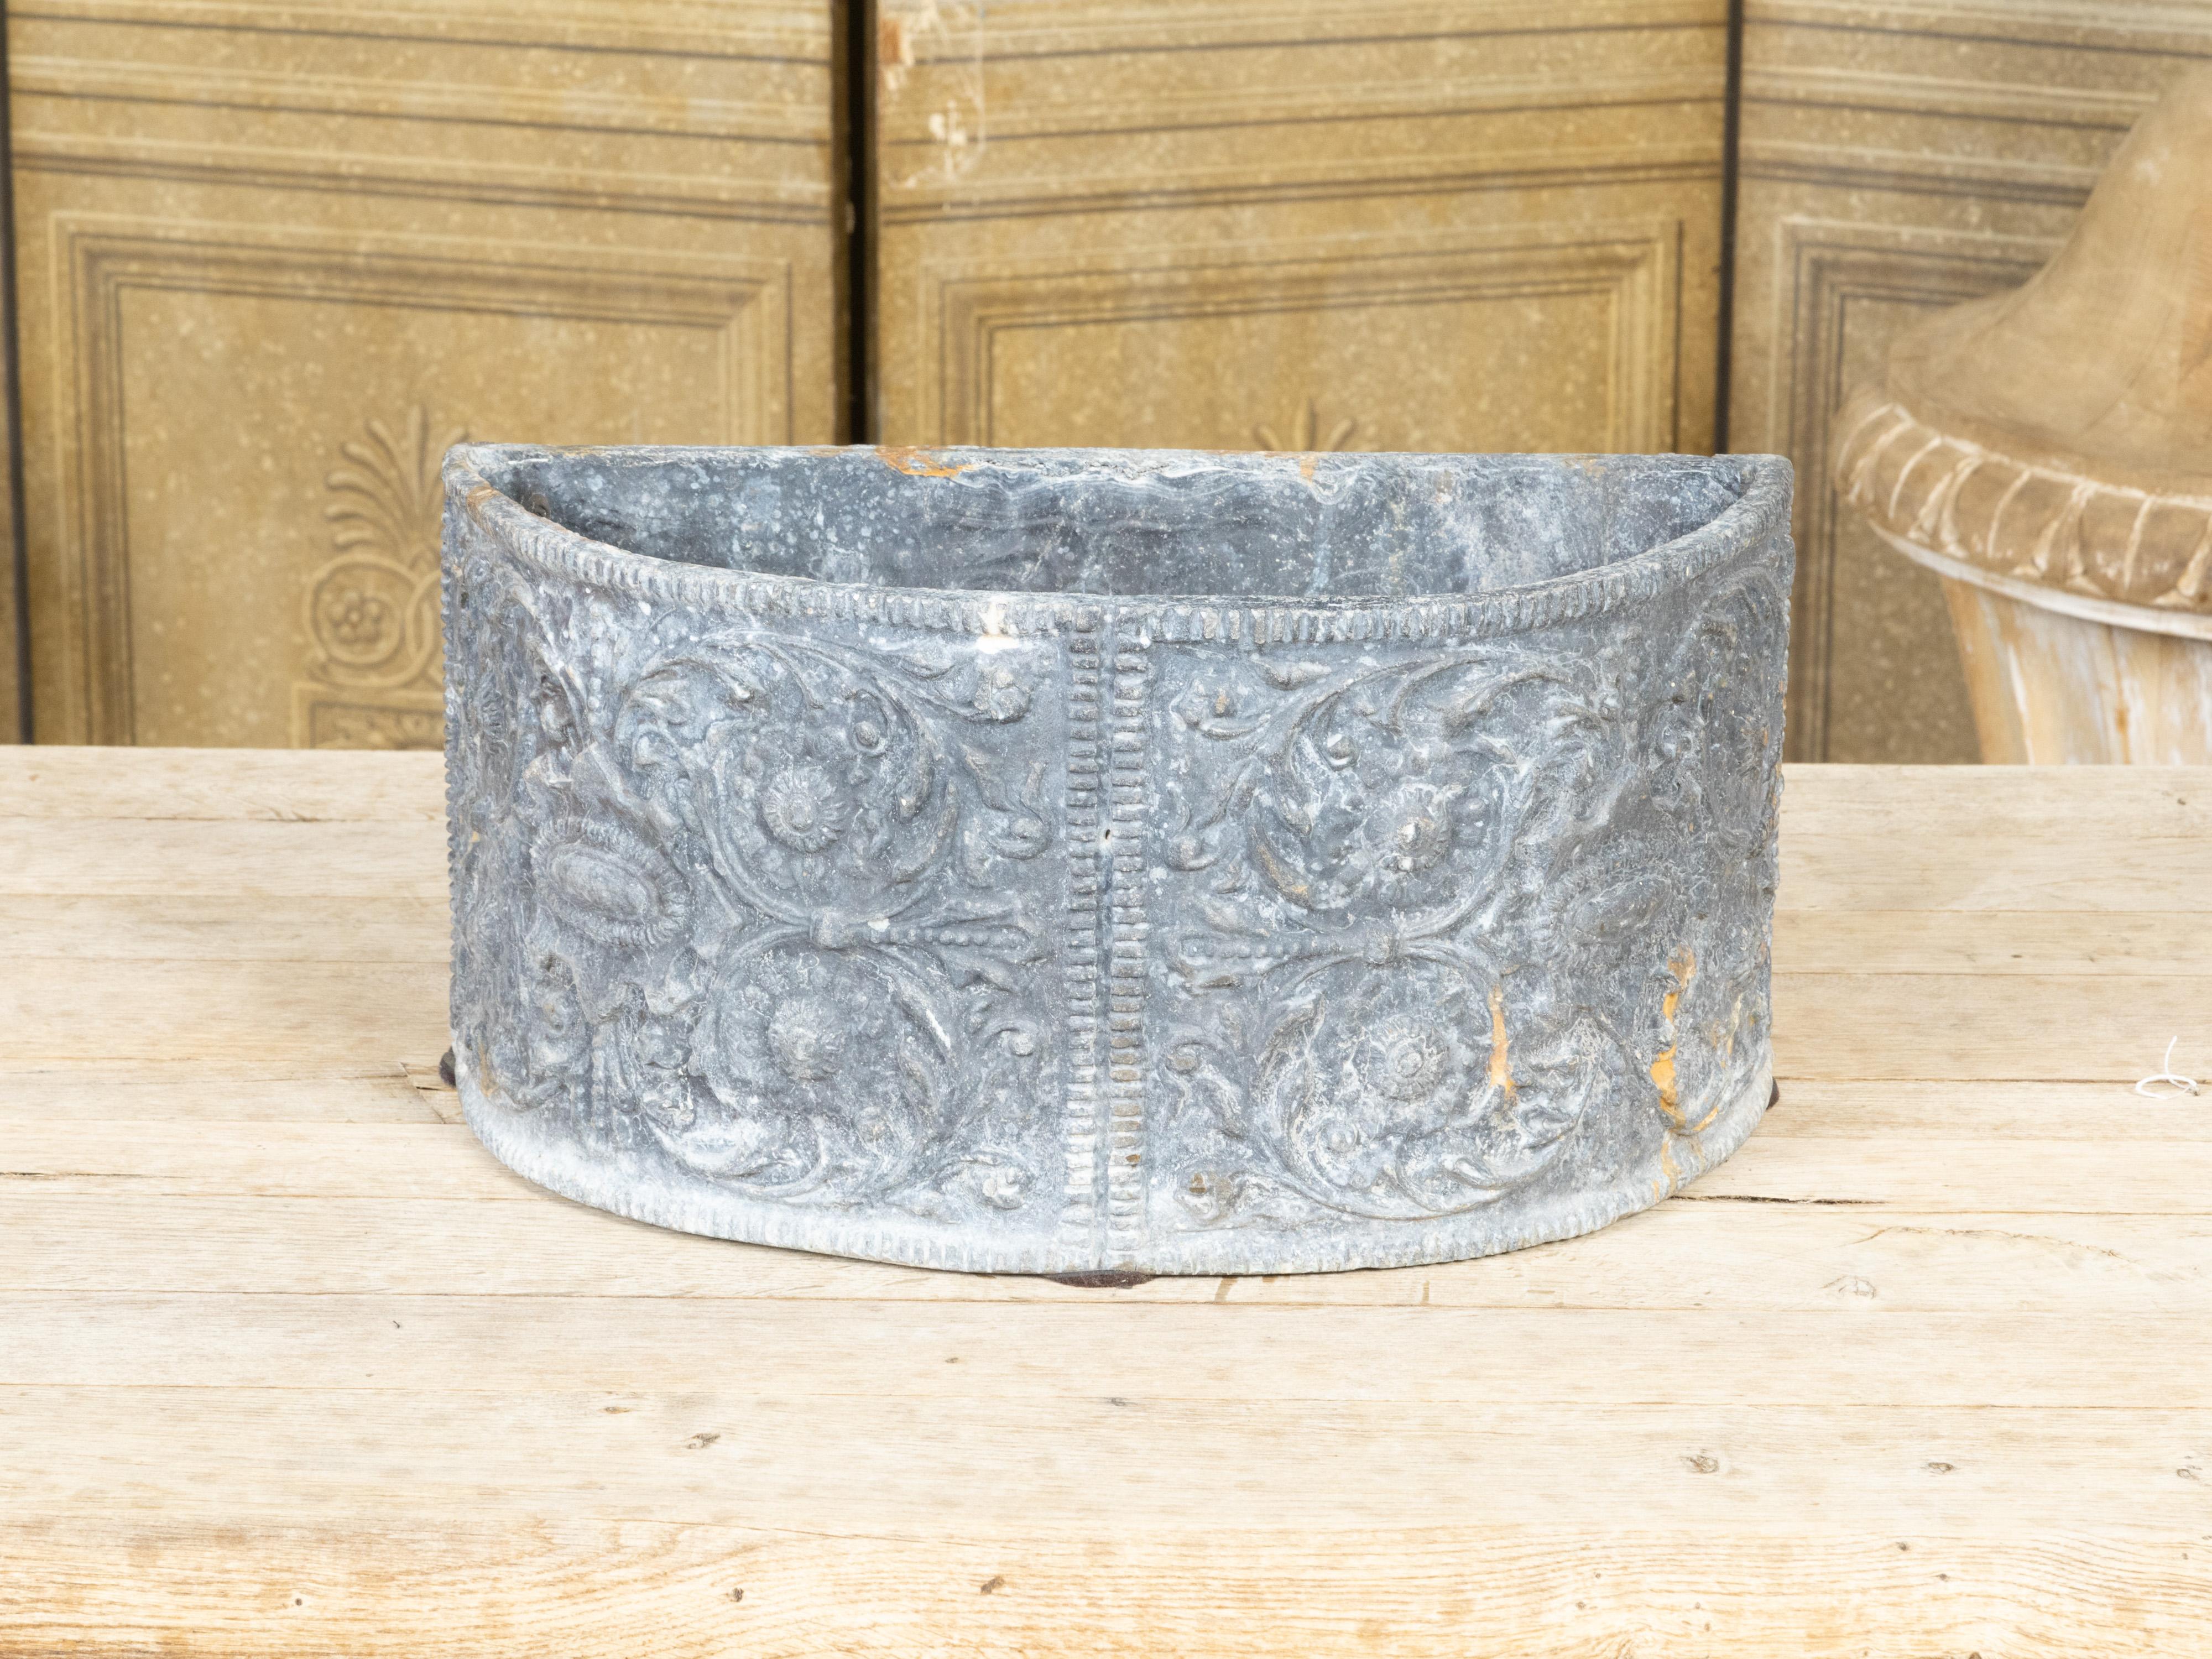 A French semi-circular lead jardinière from the early 20th century, with scrollwork of foliage and nicely weathered patina. Created in France during the Turn of the Century which saw the transition between the 19th to the 20th, this lead jardinière